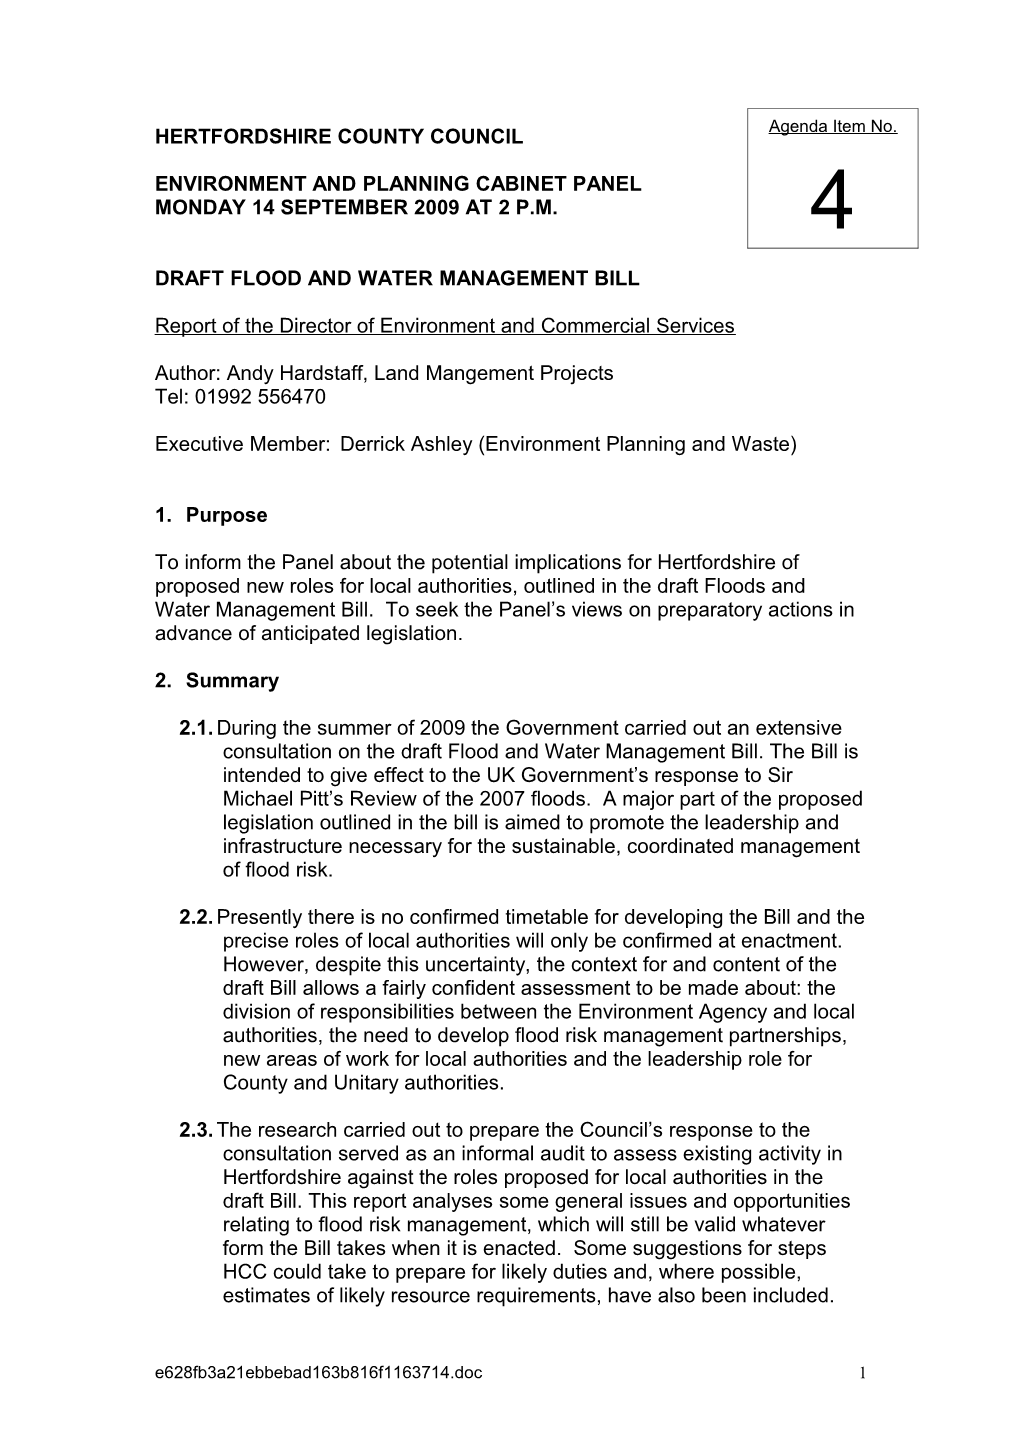 Draft Flood and Water Management Bill